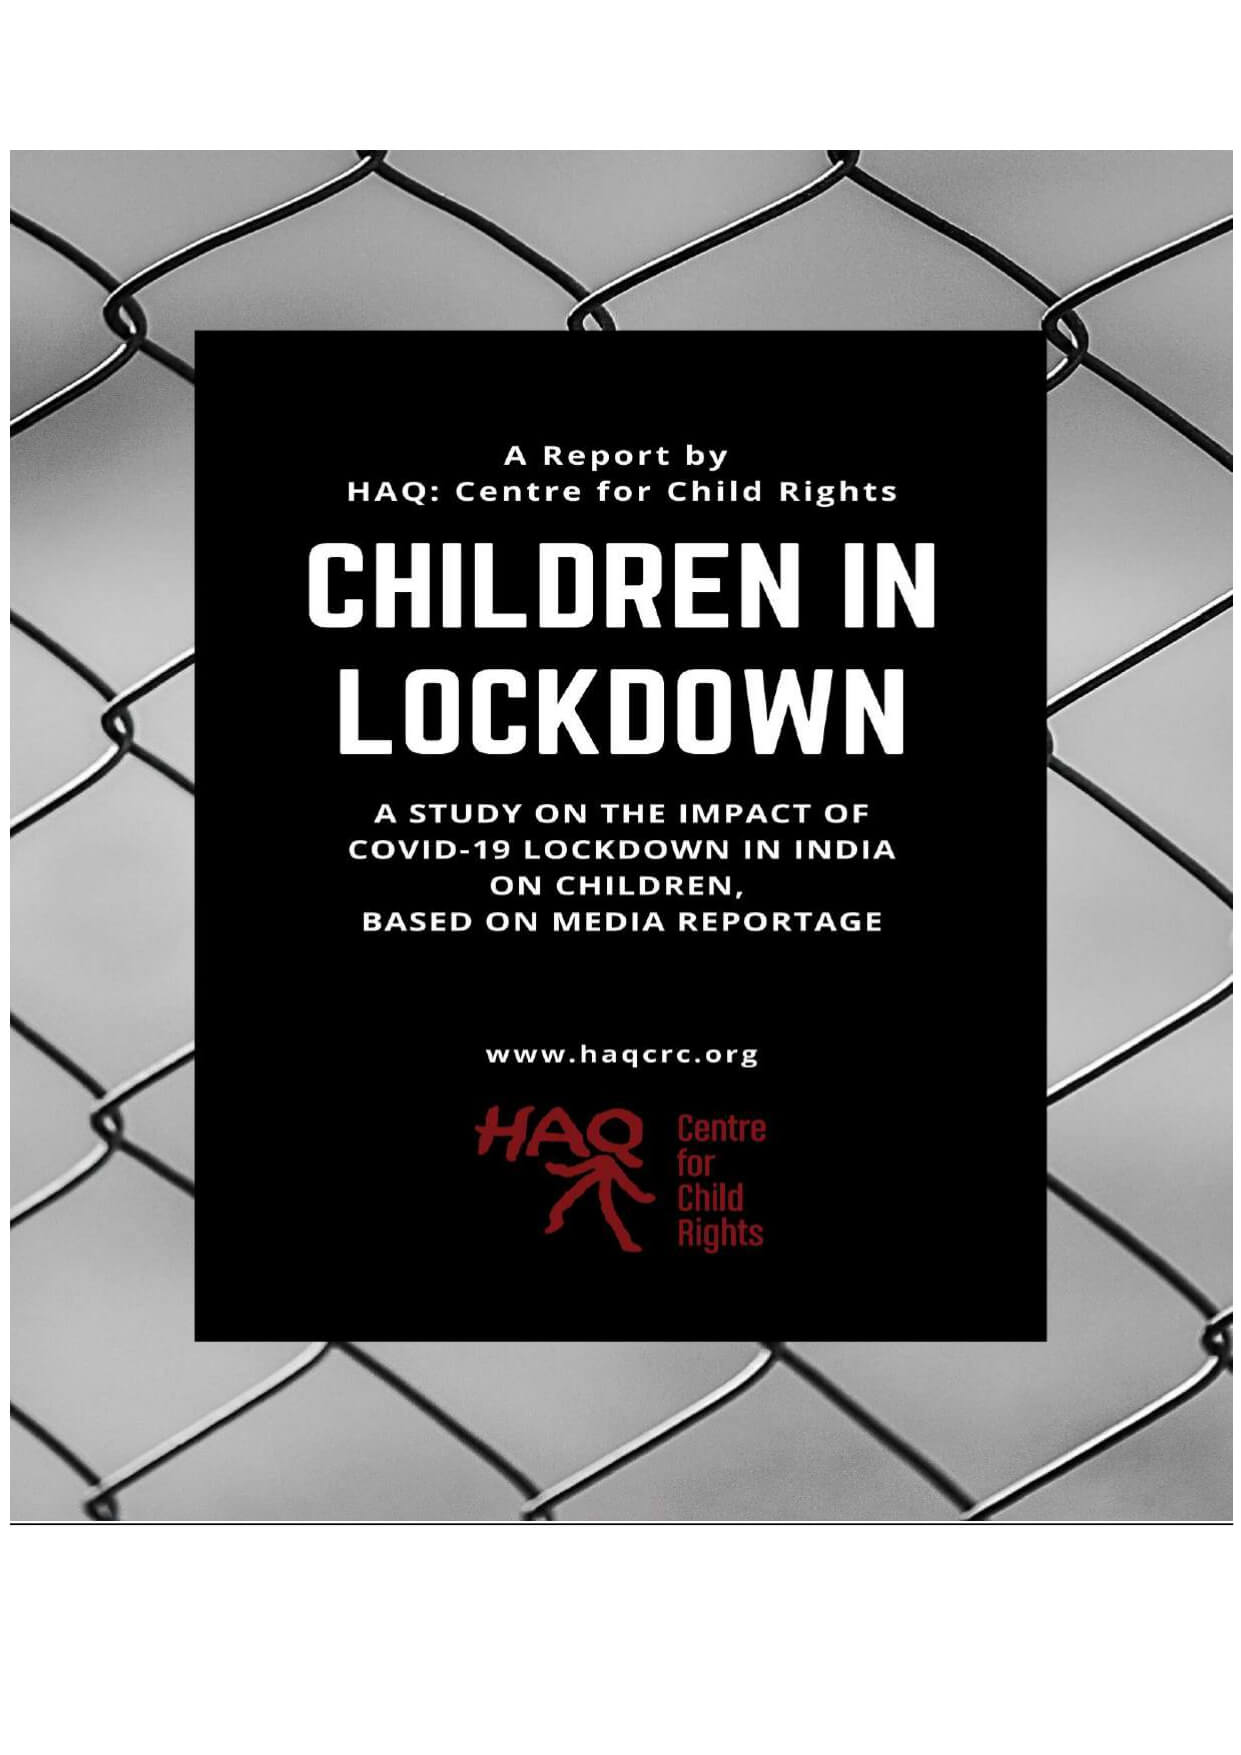 Children in Lockdown: A Study on the Impact of COVID-19 Lockdown in India on Children – Based on Media Reportage